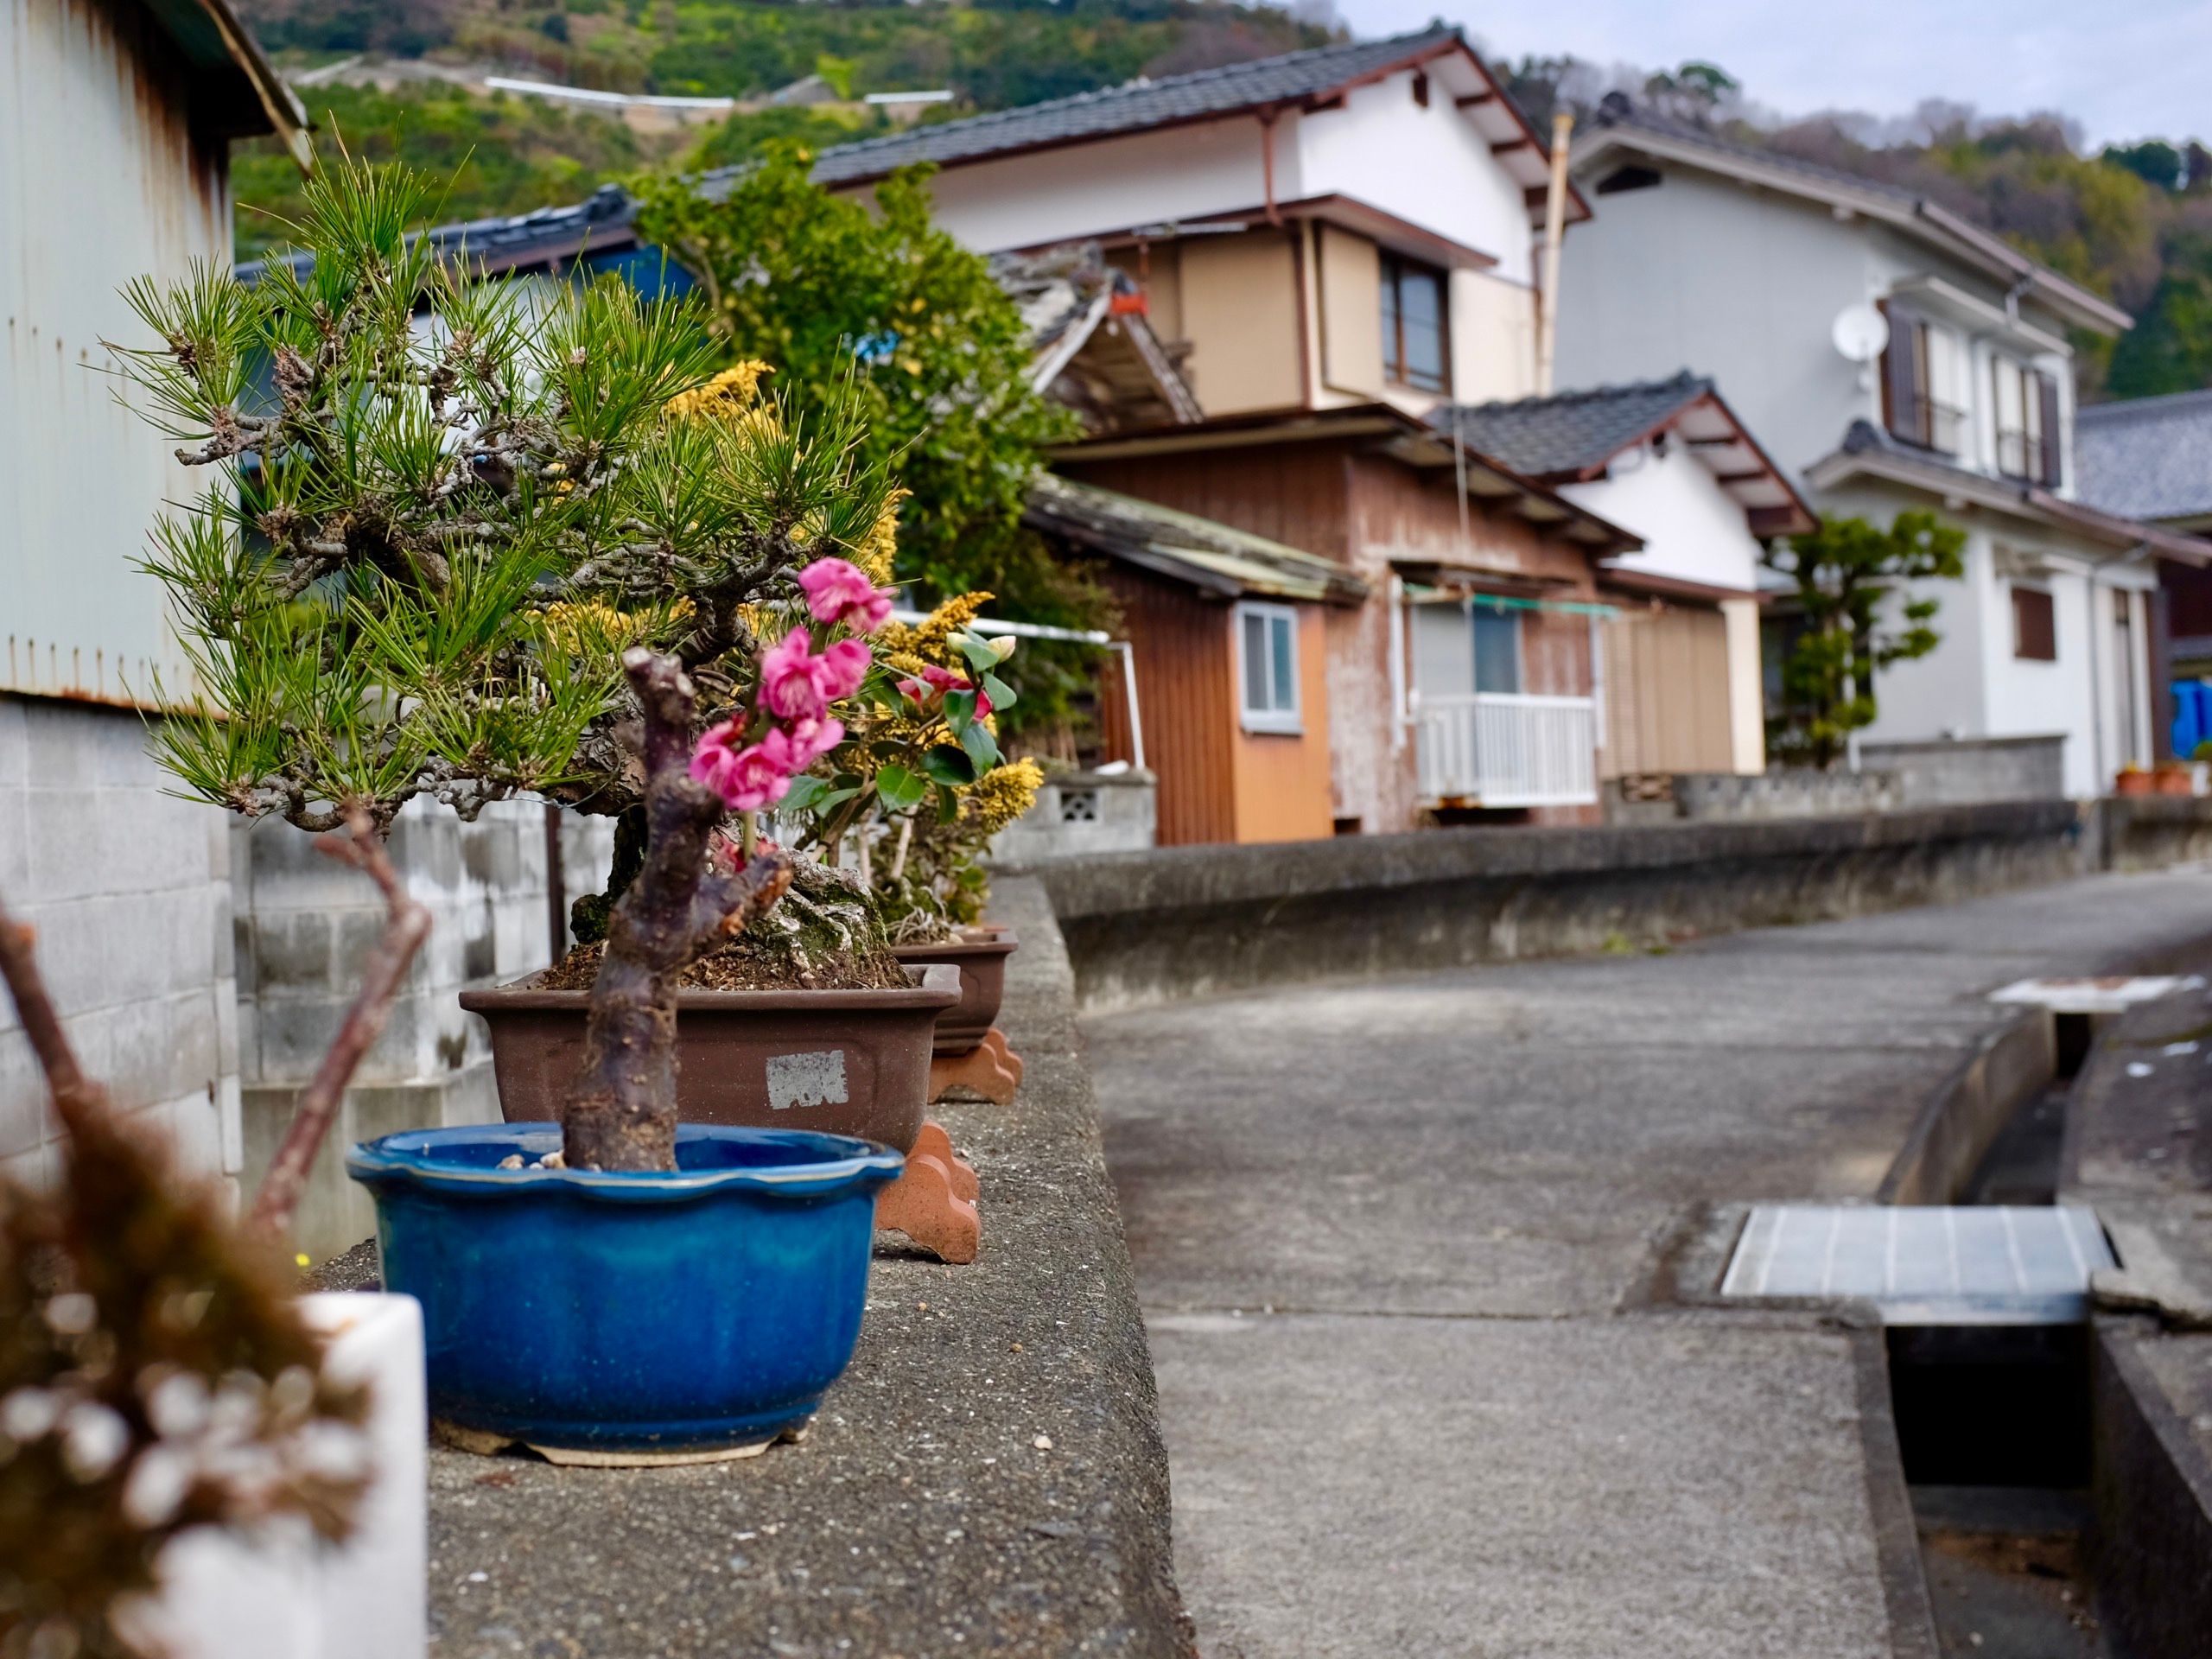 Potted bonsai trees bearing colorful flowers on a concrete ledge in front of similarly colorful houses.